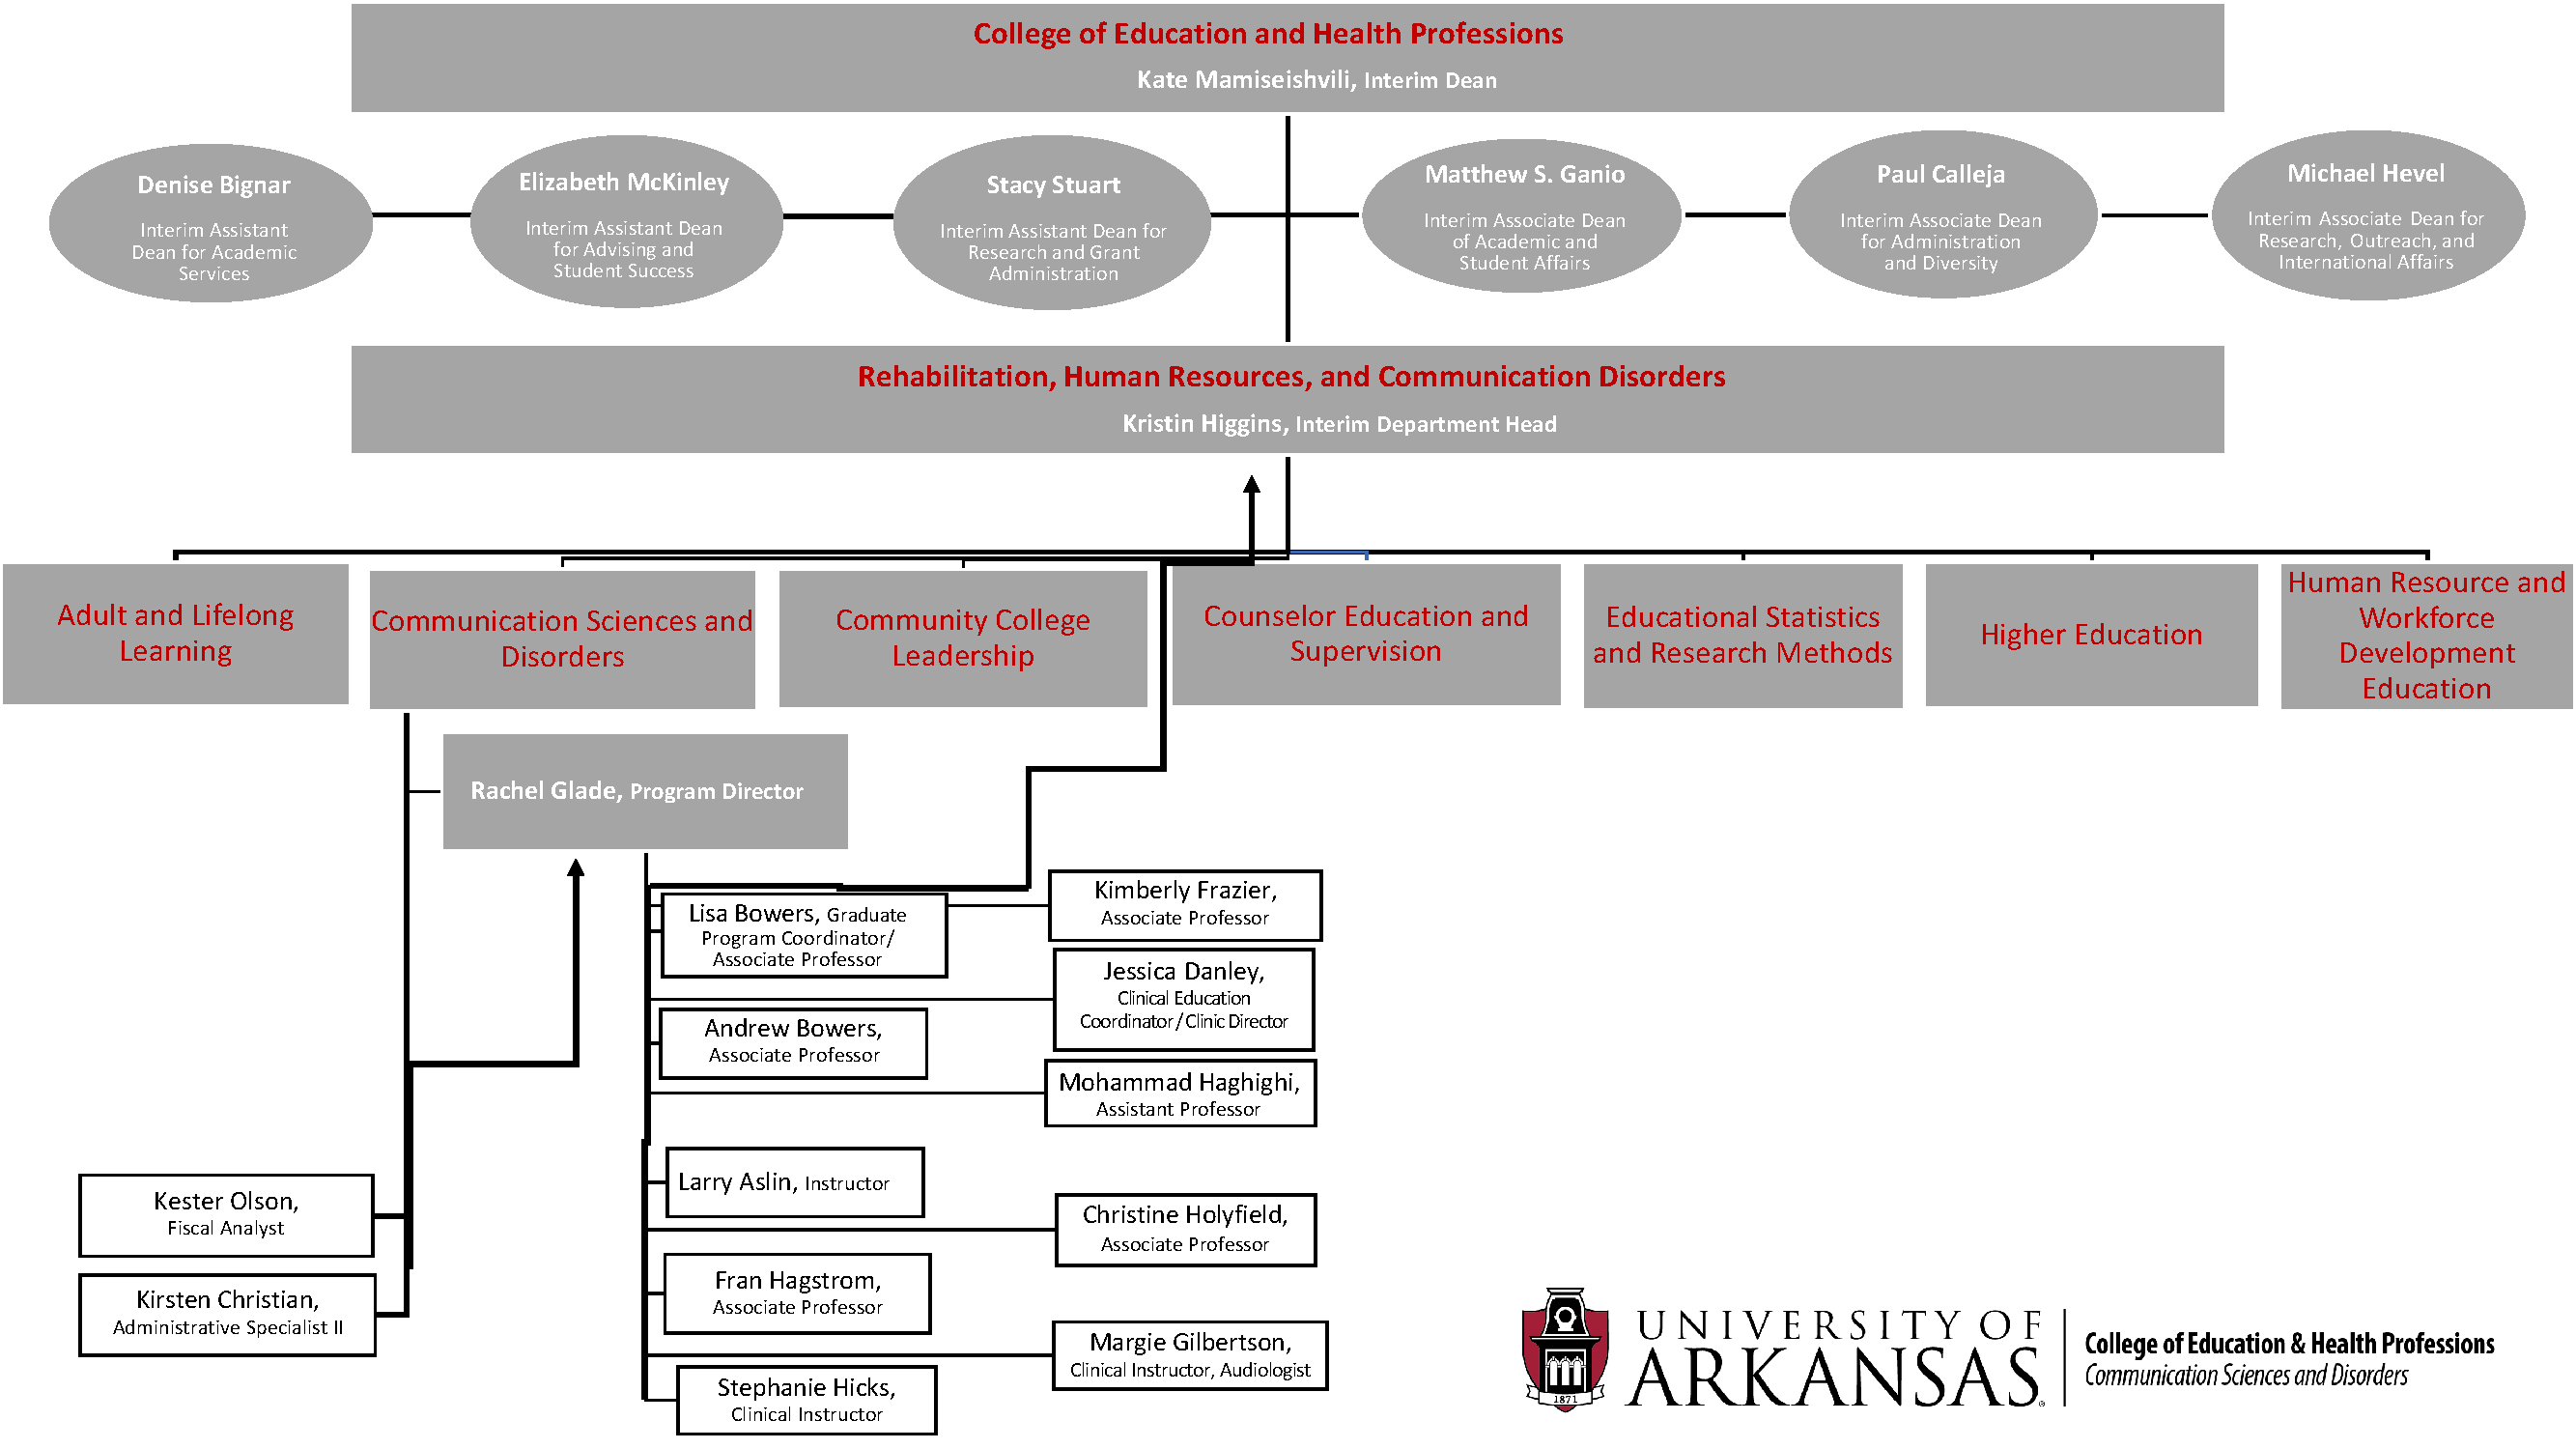 Click image for PDF of CDIS organizational chart for fall 2022